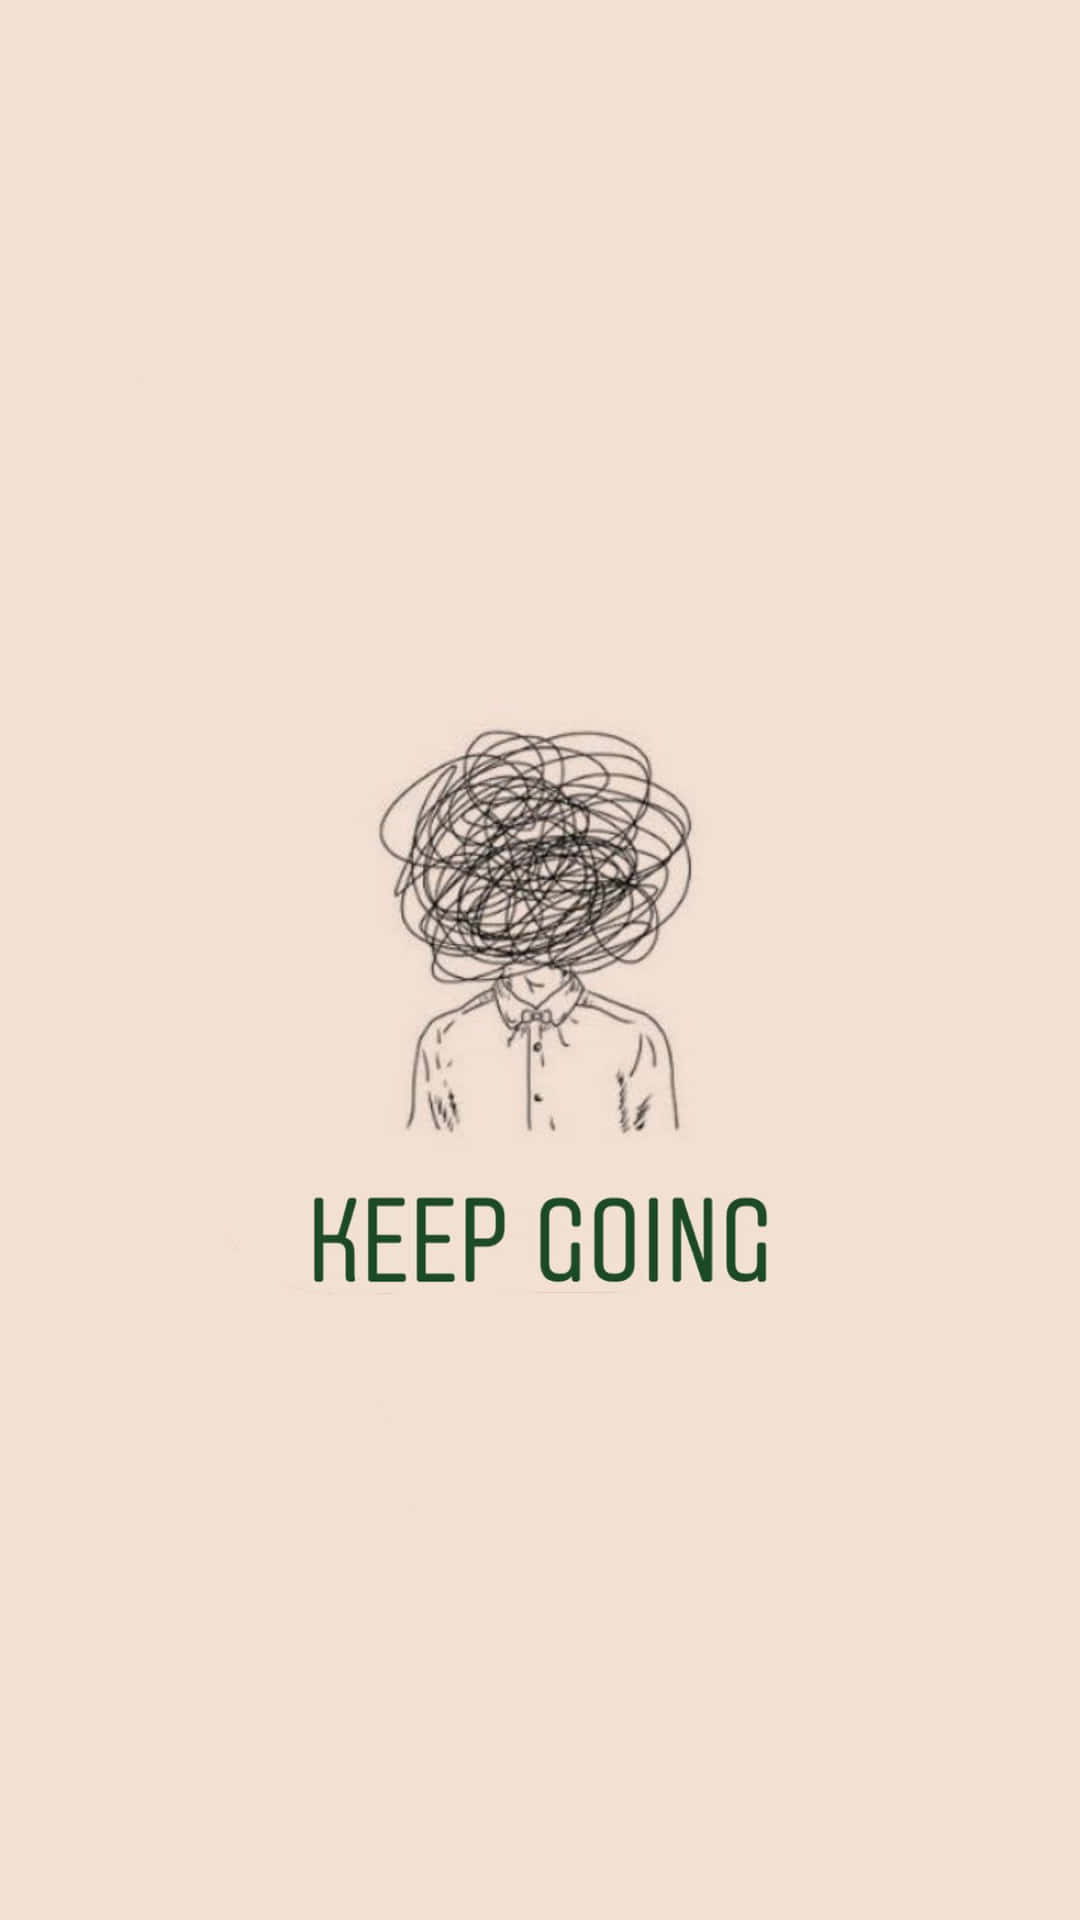 Keep Going - A Man With A Head Full Of Tangled Hair Wallpaper